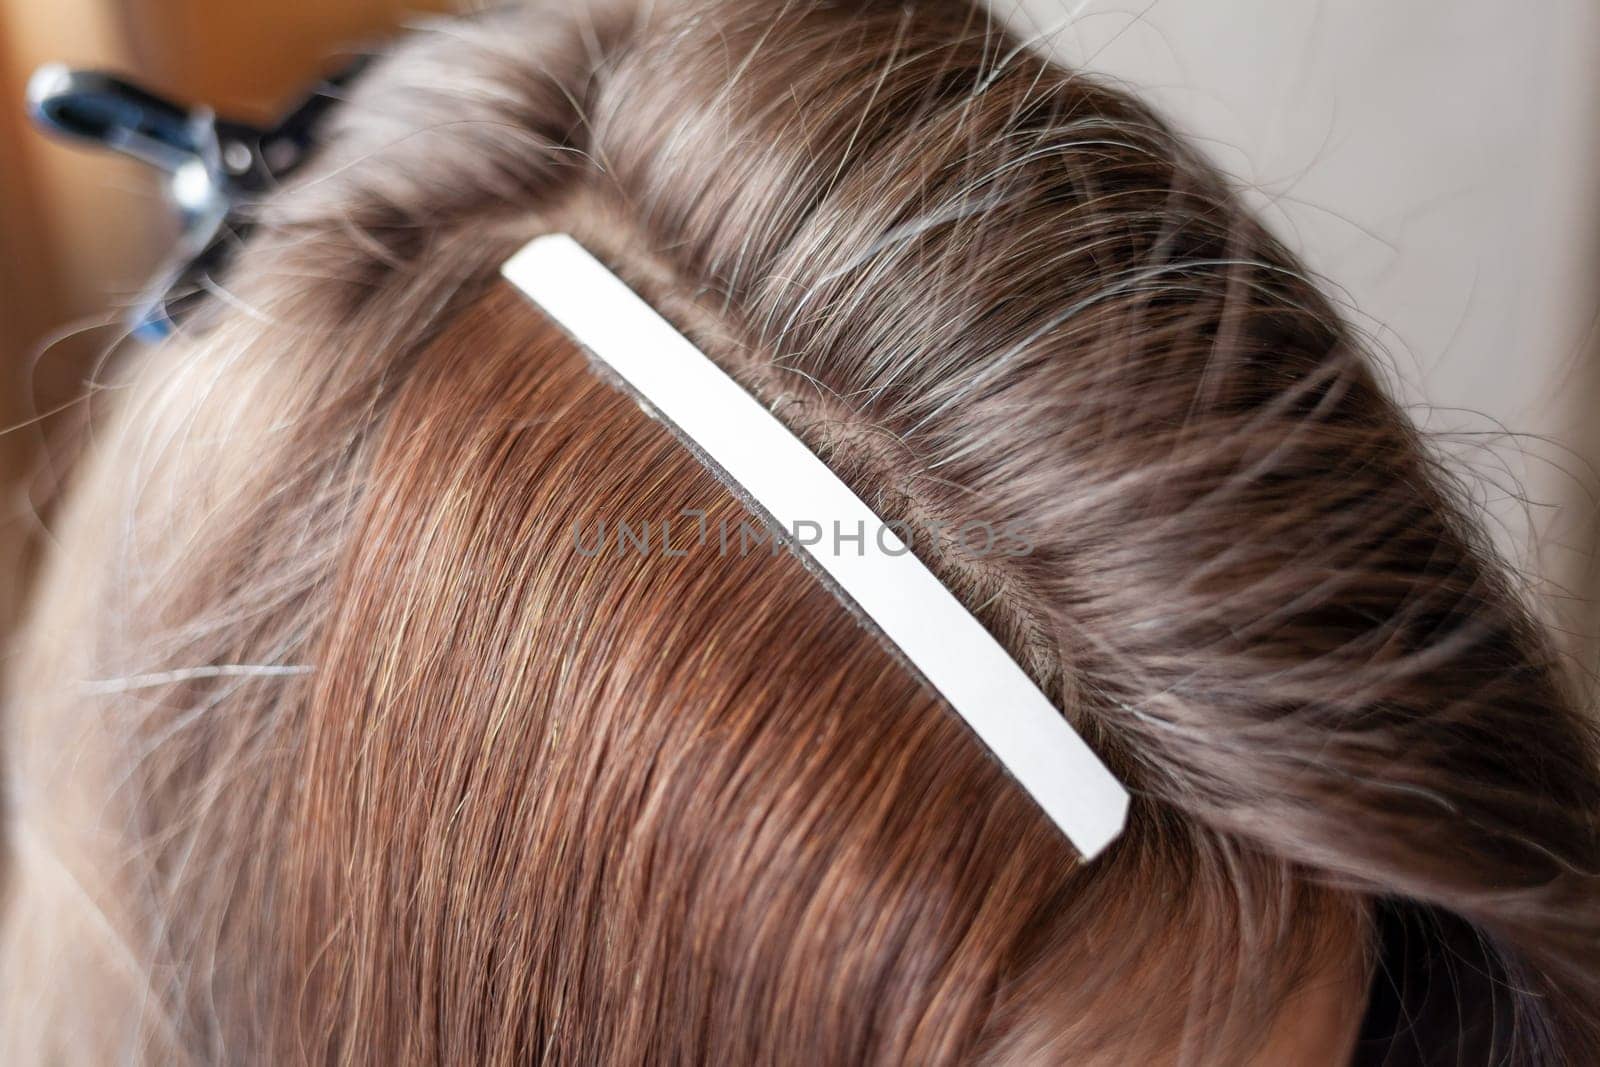 Hair ribbons for extensions on a woman's head at home. Hair extensions to thicken your own. Individual strands of hair close-up